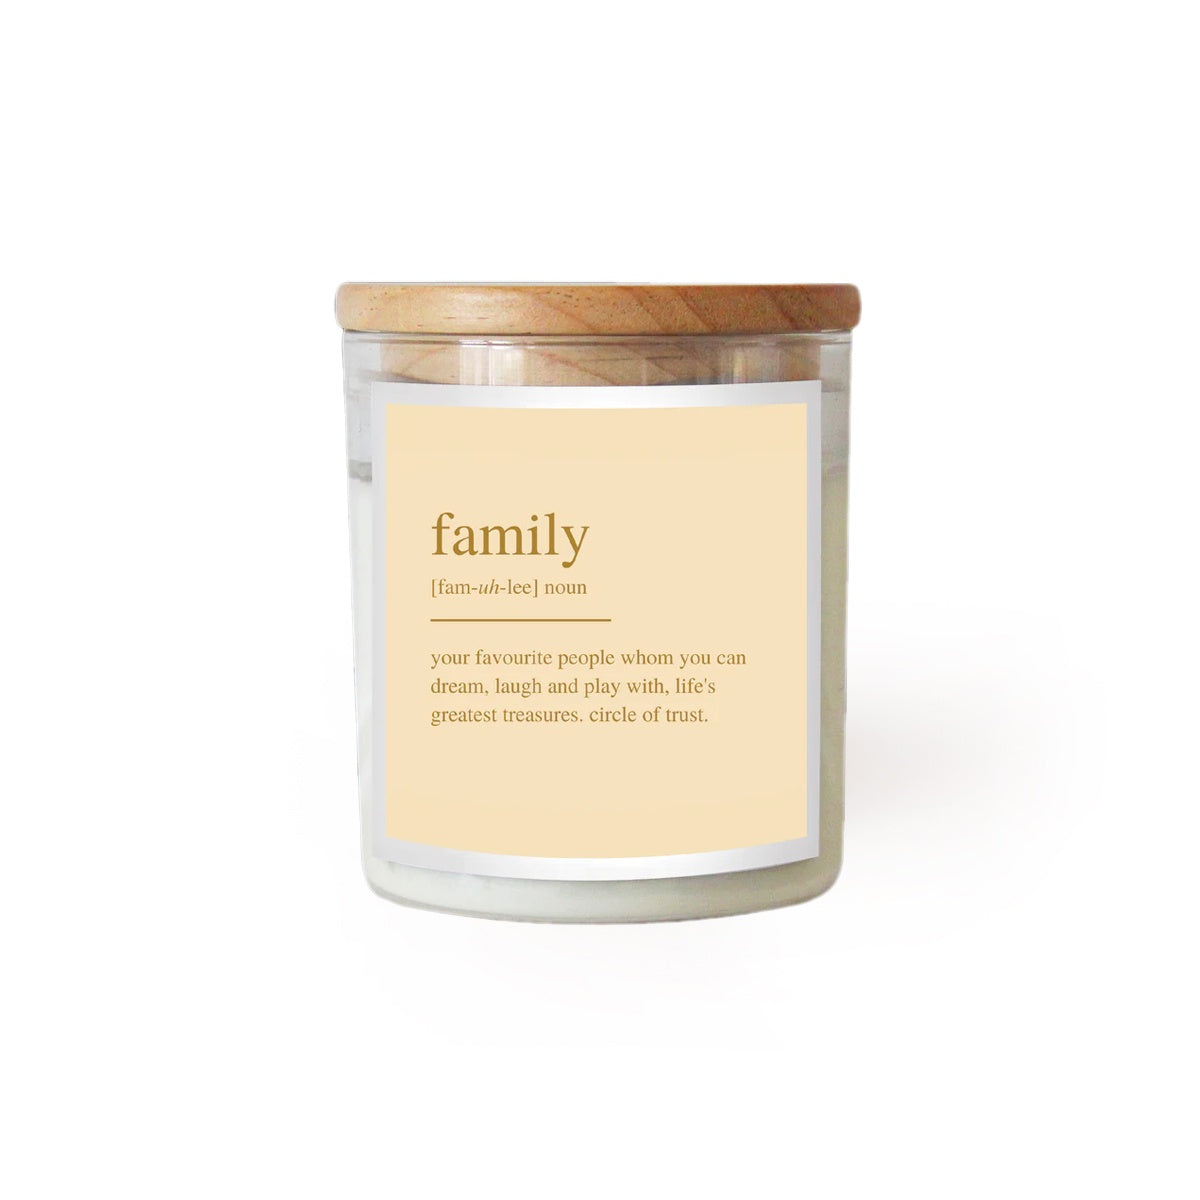 LIMITED EDITION Dictionary Meaning Candle - Family